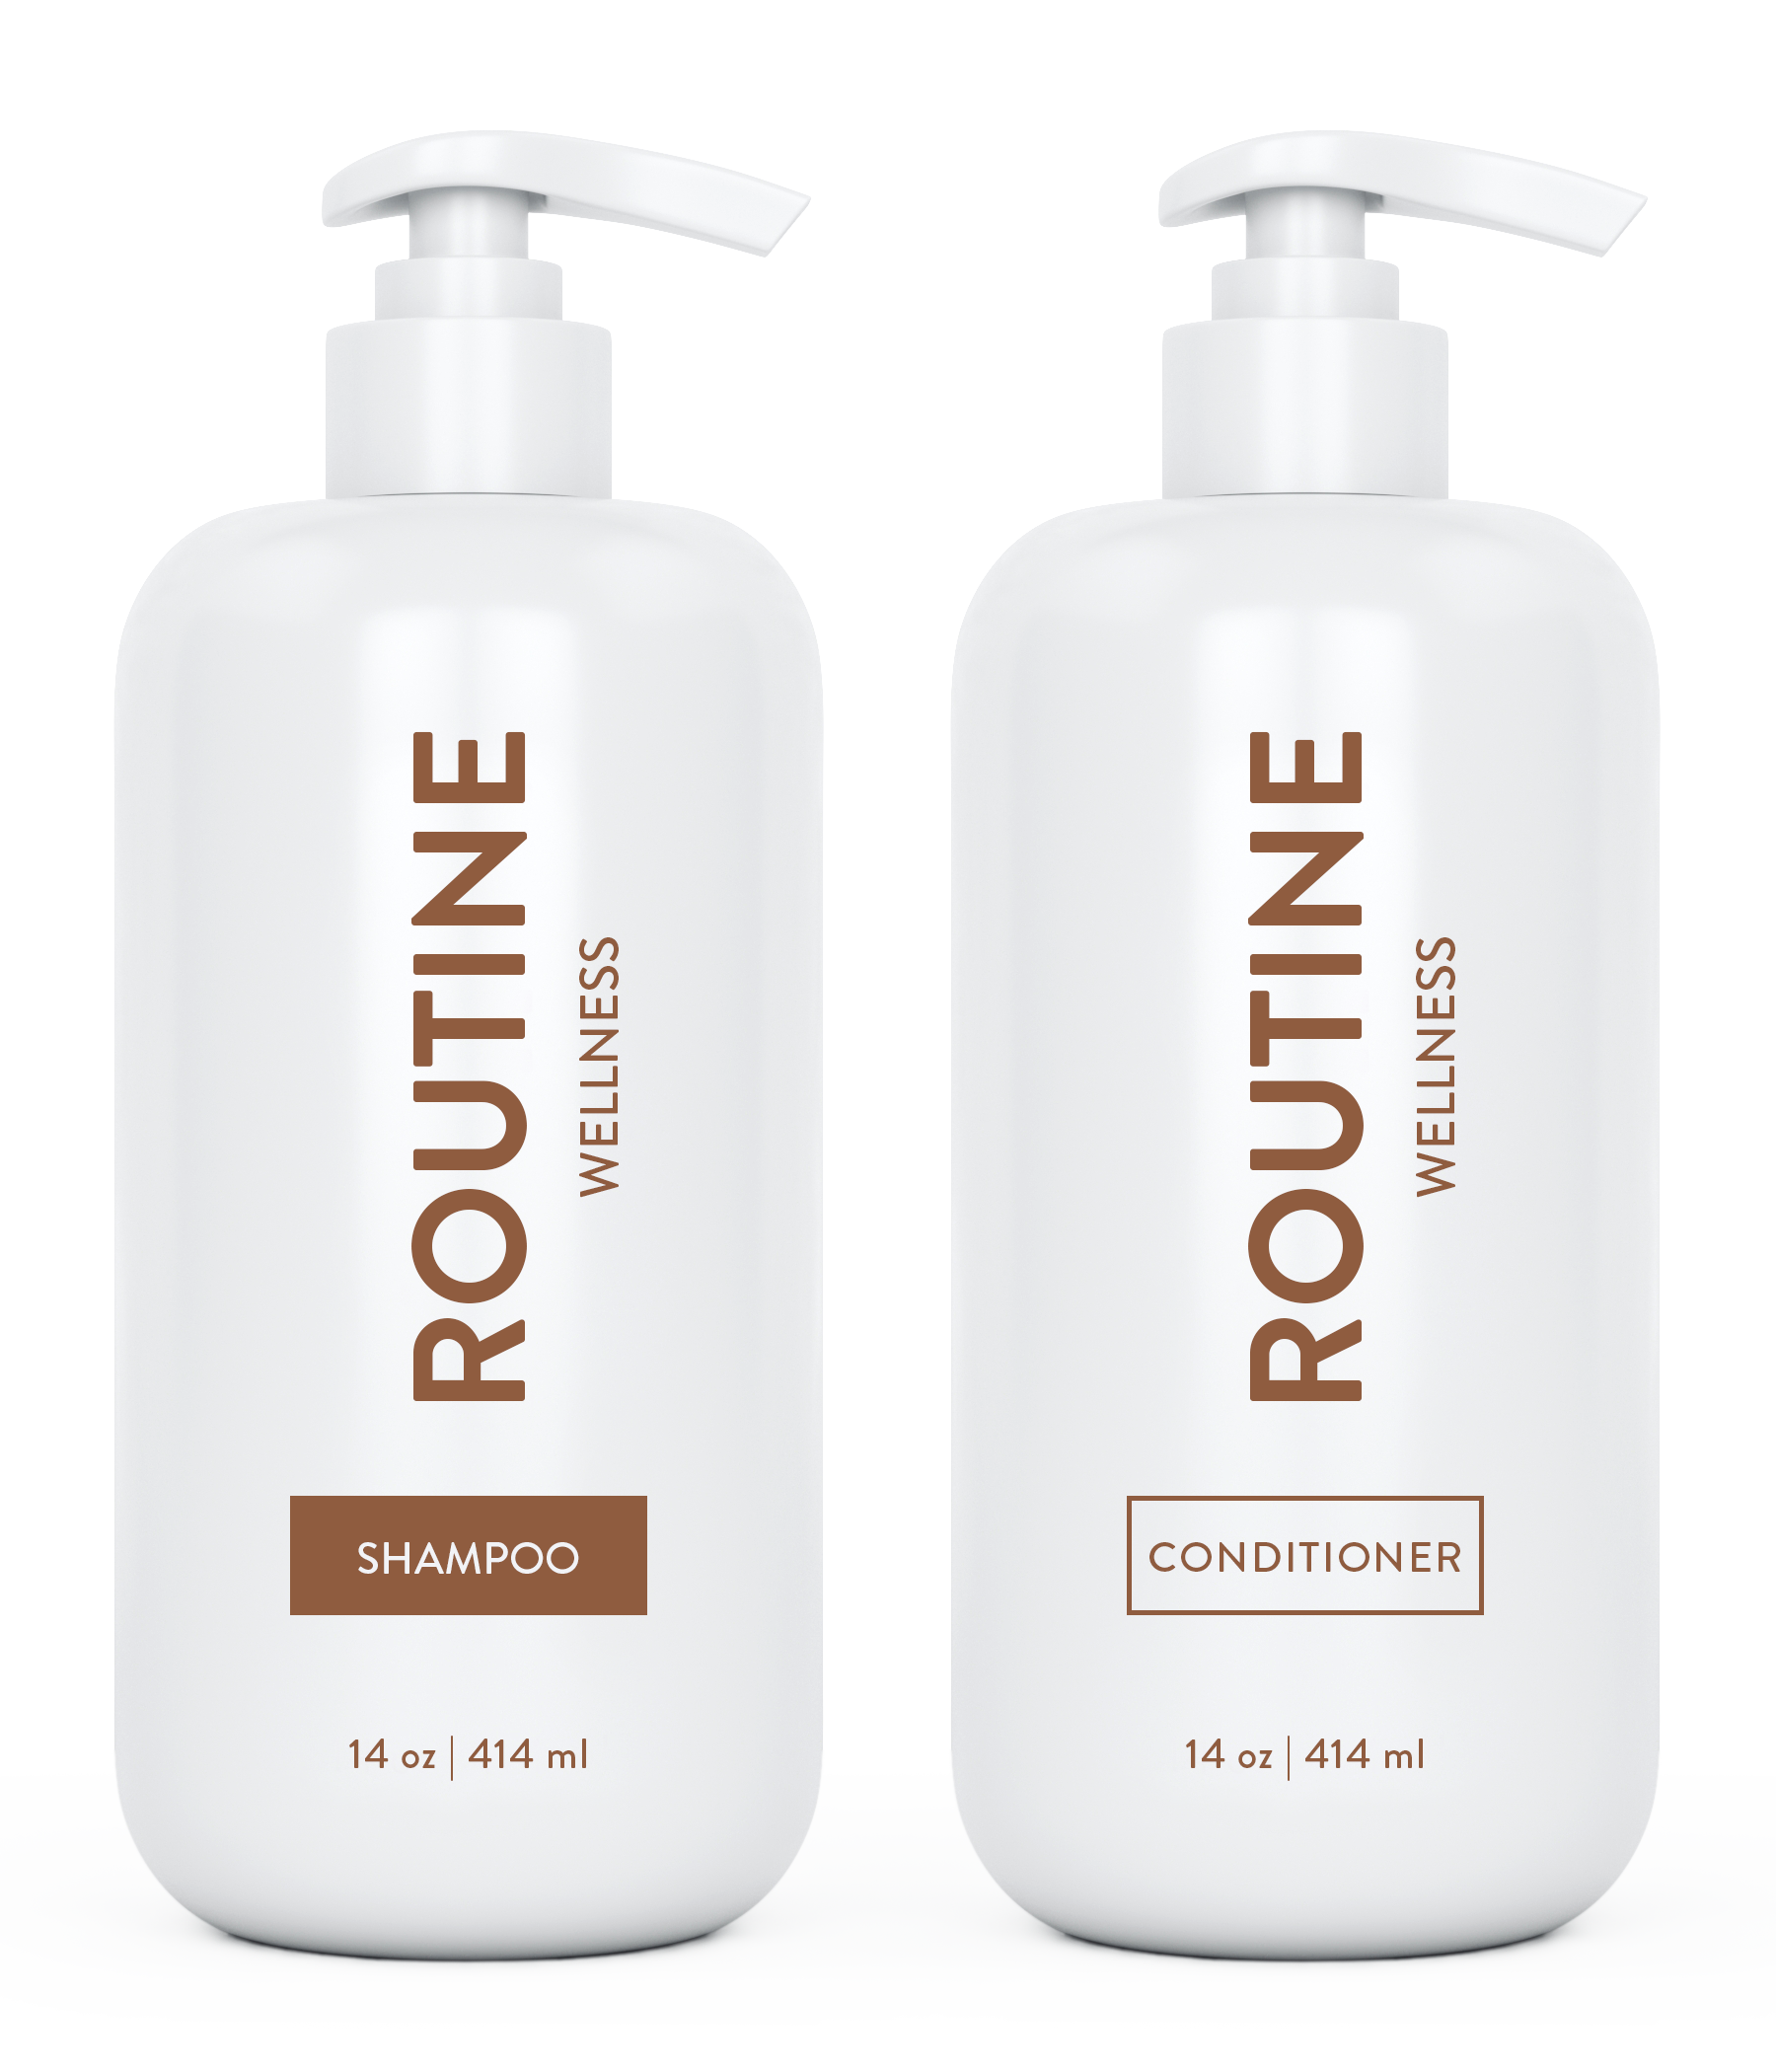 Routine Wellness Shampoo and Conditioner are scientifically formulated to end bad hair days by strengthening hair and reducing breakage